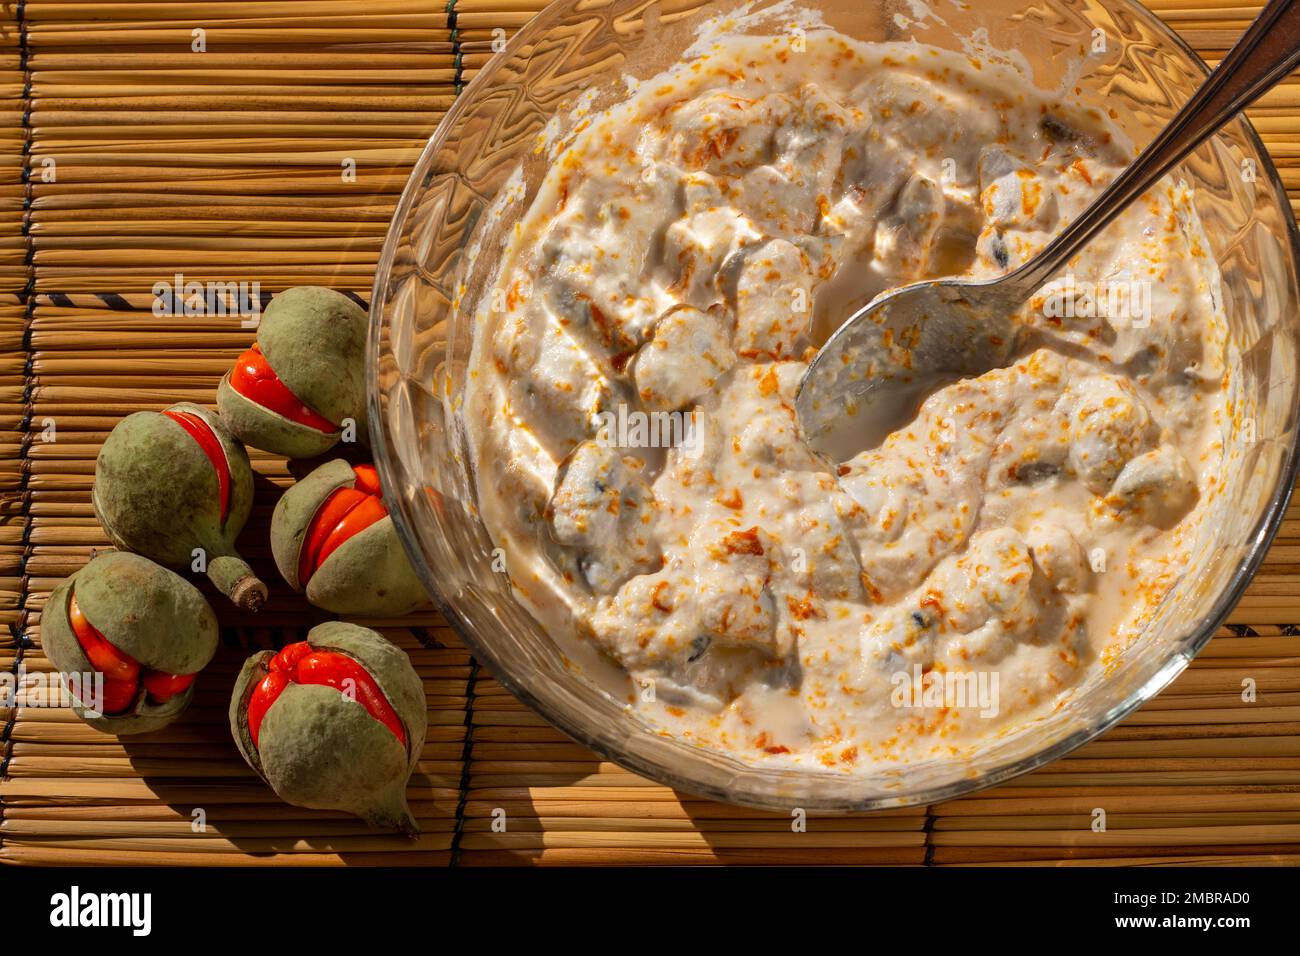 A bowl of mashed Trichilia emetica, also known as Natal mahogany or mafura, the wild fruit is transformed into a creamy and delicious dessert Stock Photo